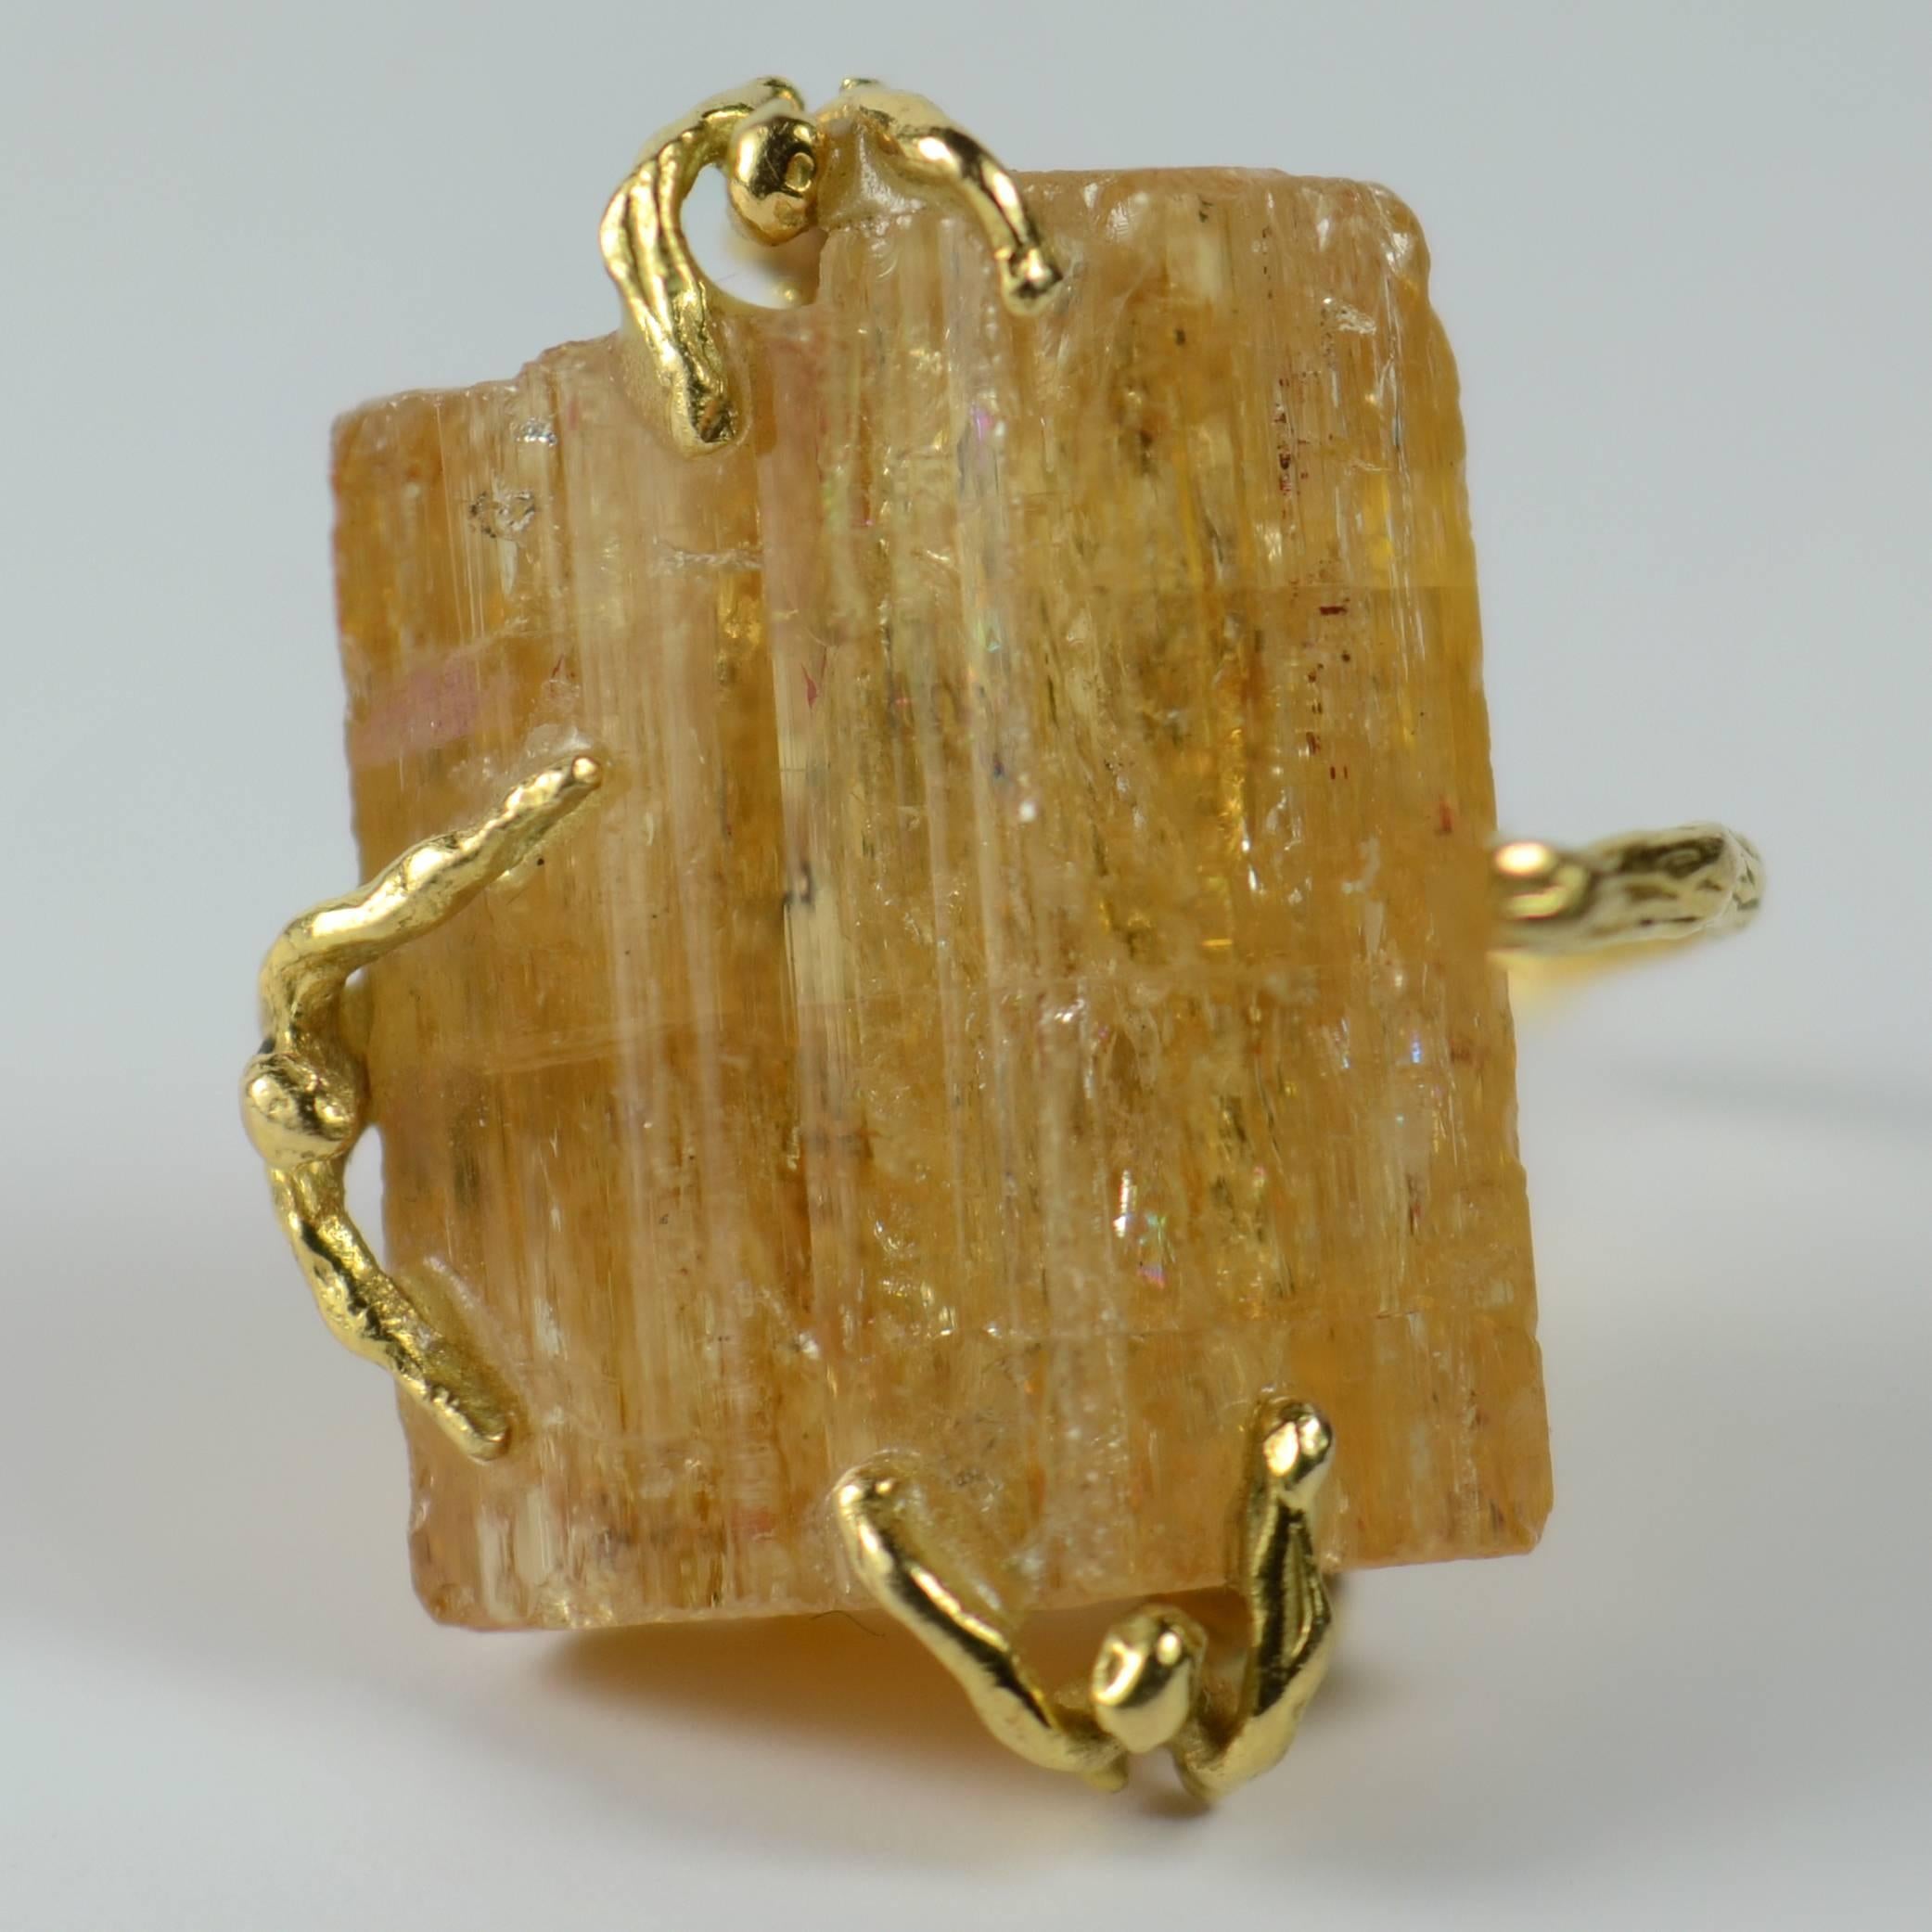 An artist-made ring depicting three figures clinging to a crystal of Brazilian orange topaz. The figures are fashioned from 18 carat gold wire and are standing on a branch, which forms the shank of this ring.  The topaz crystal measures 2.2cm x